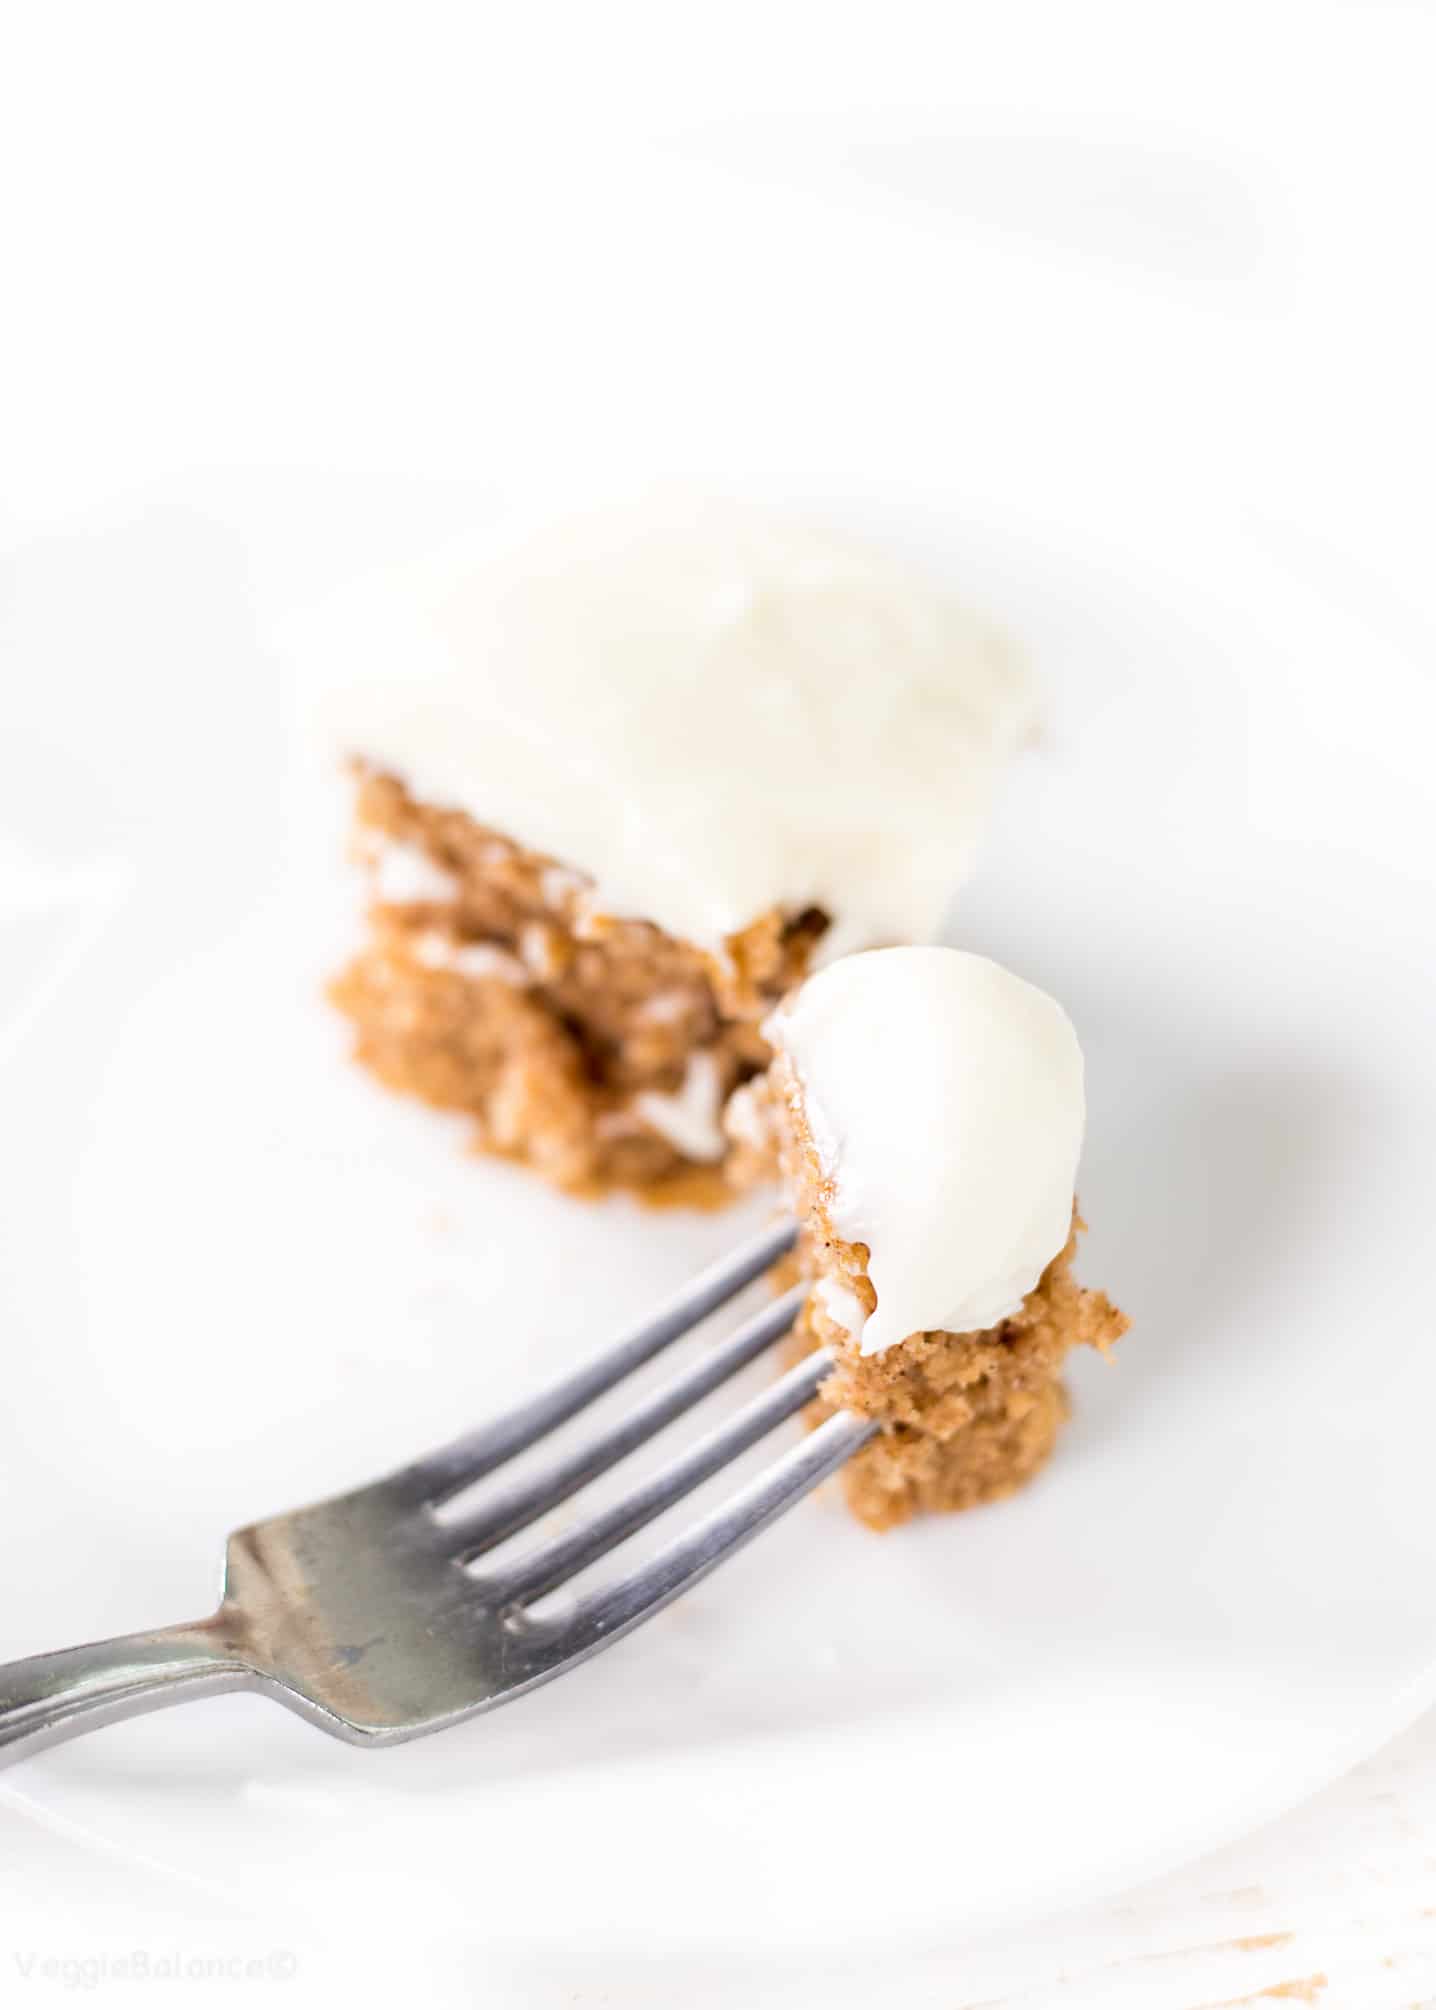 Applesauce Spice Cake Recipe with Cream Cheese Frosting